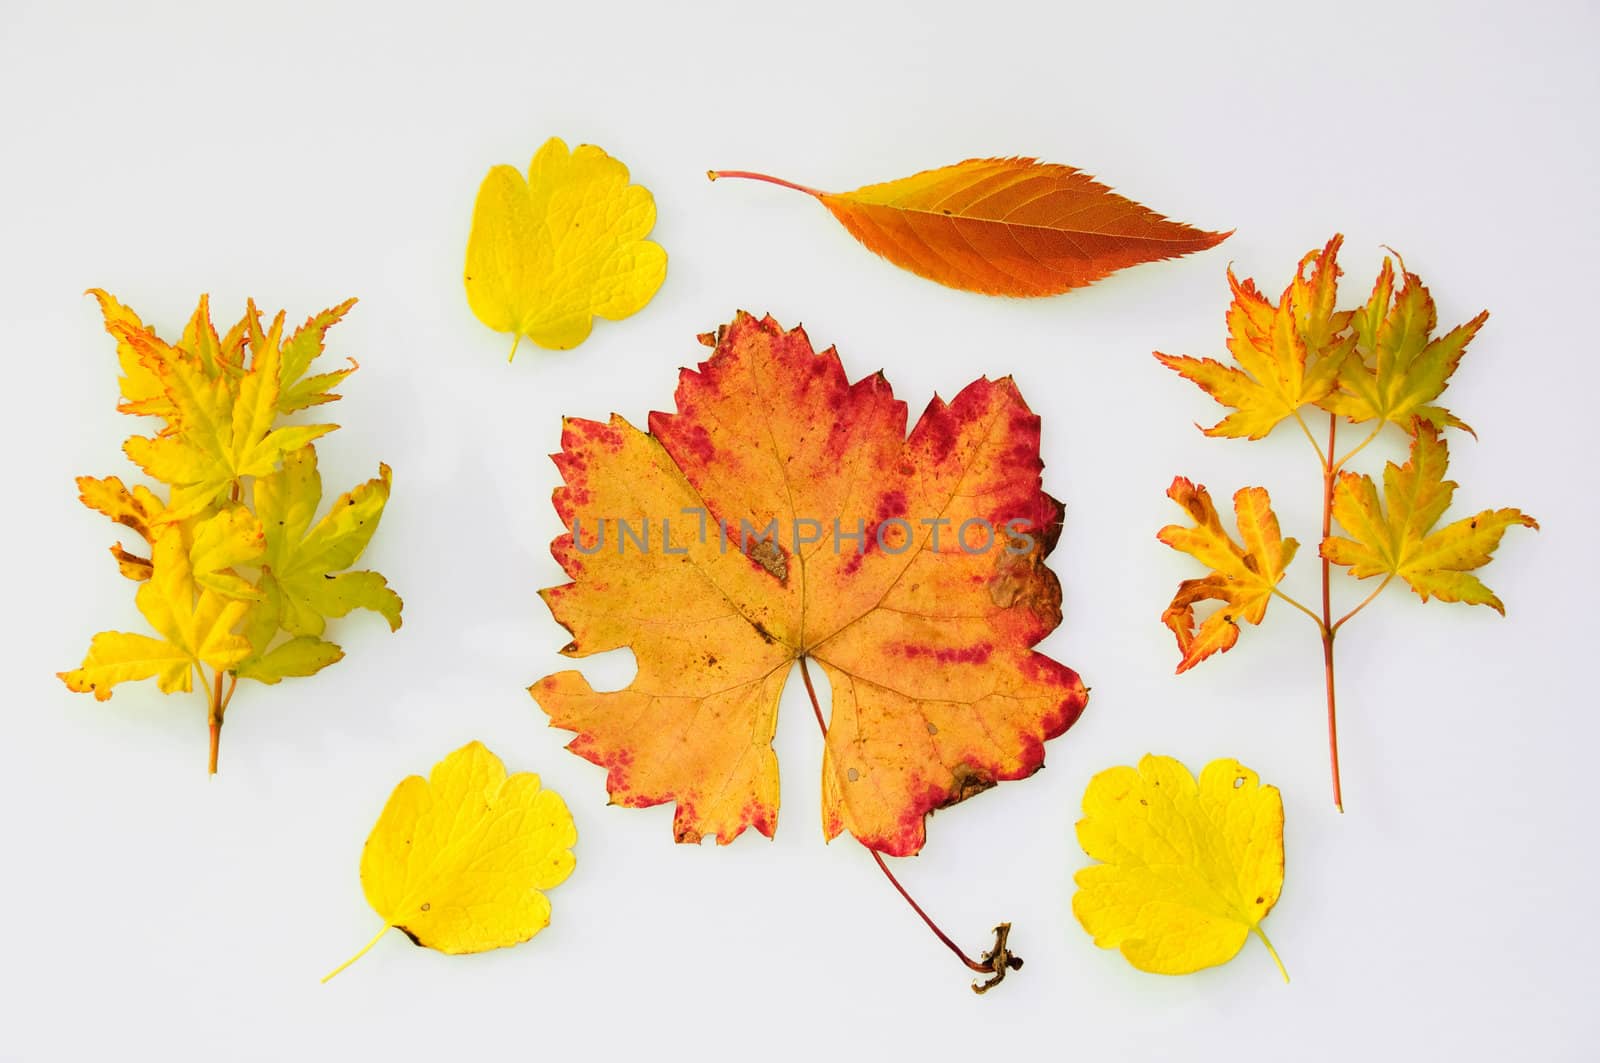 A collection of fall leaves in yellow and orange colors. Isolated